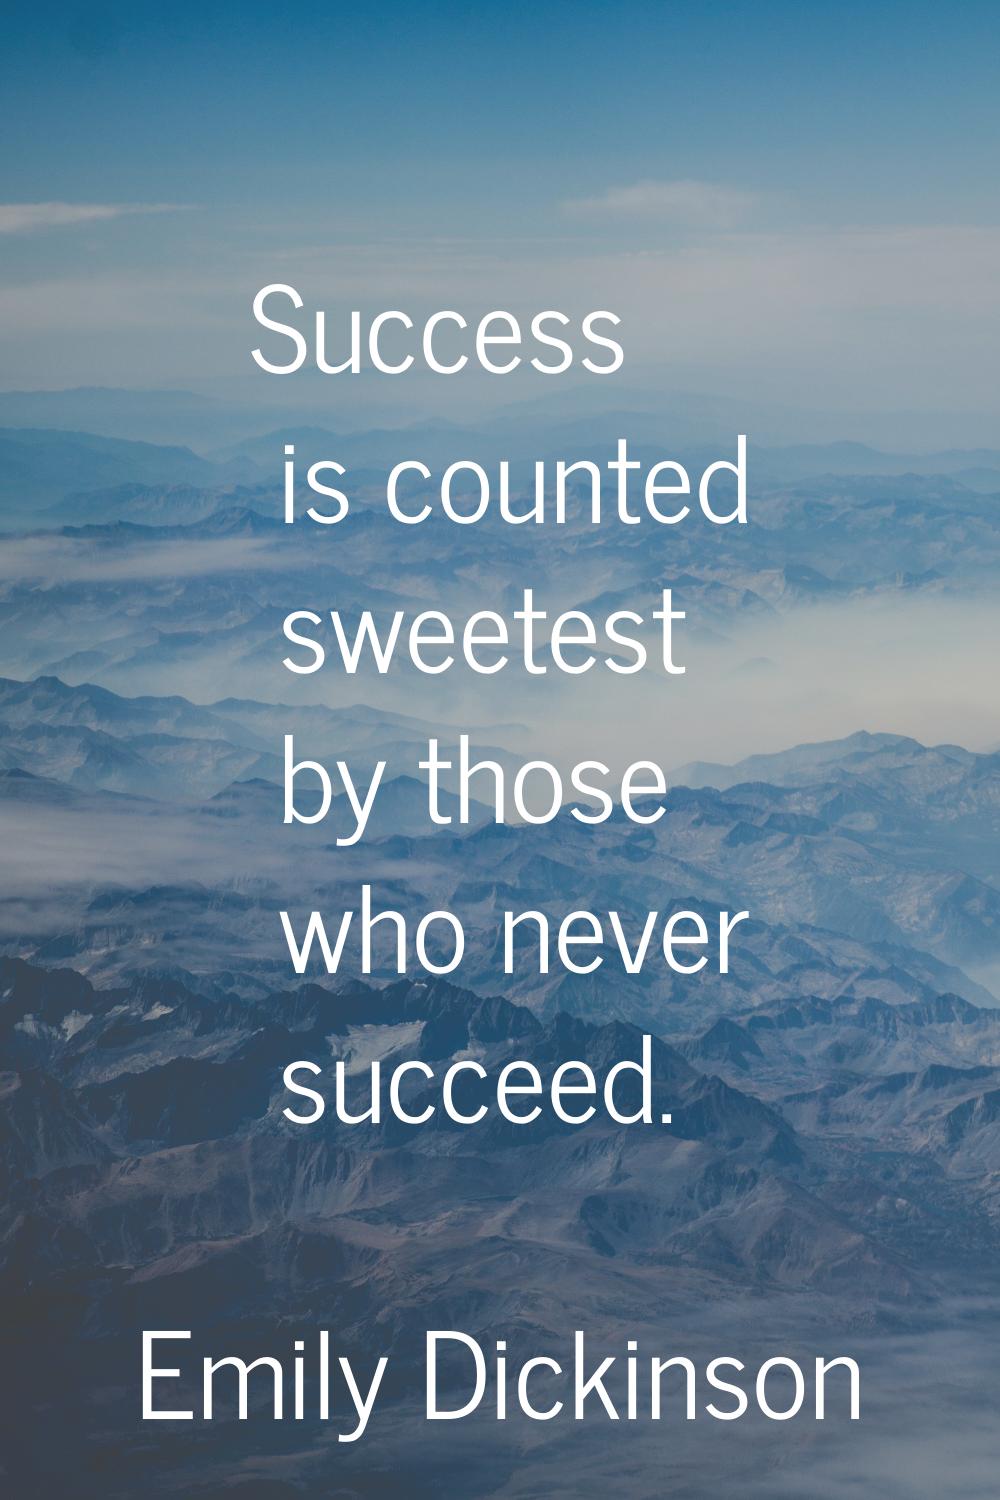 Success is counted sweetest by those who never succeed.